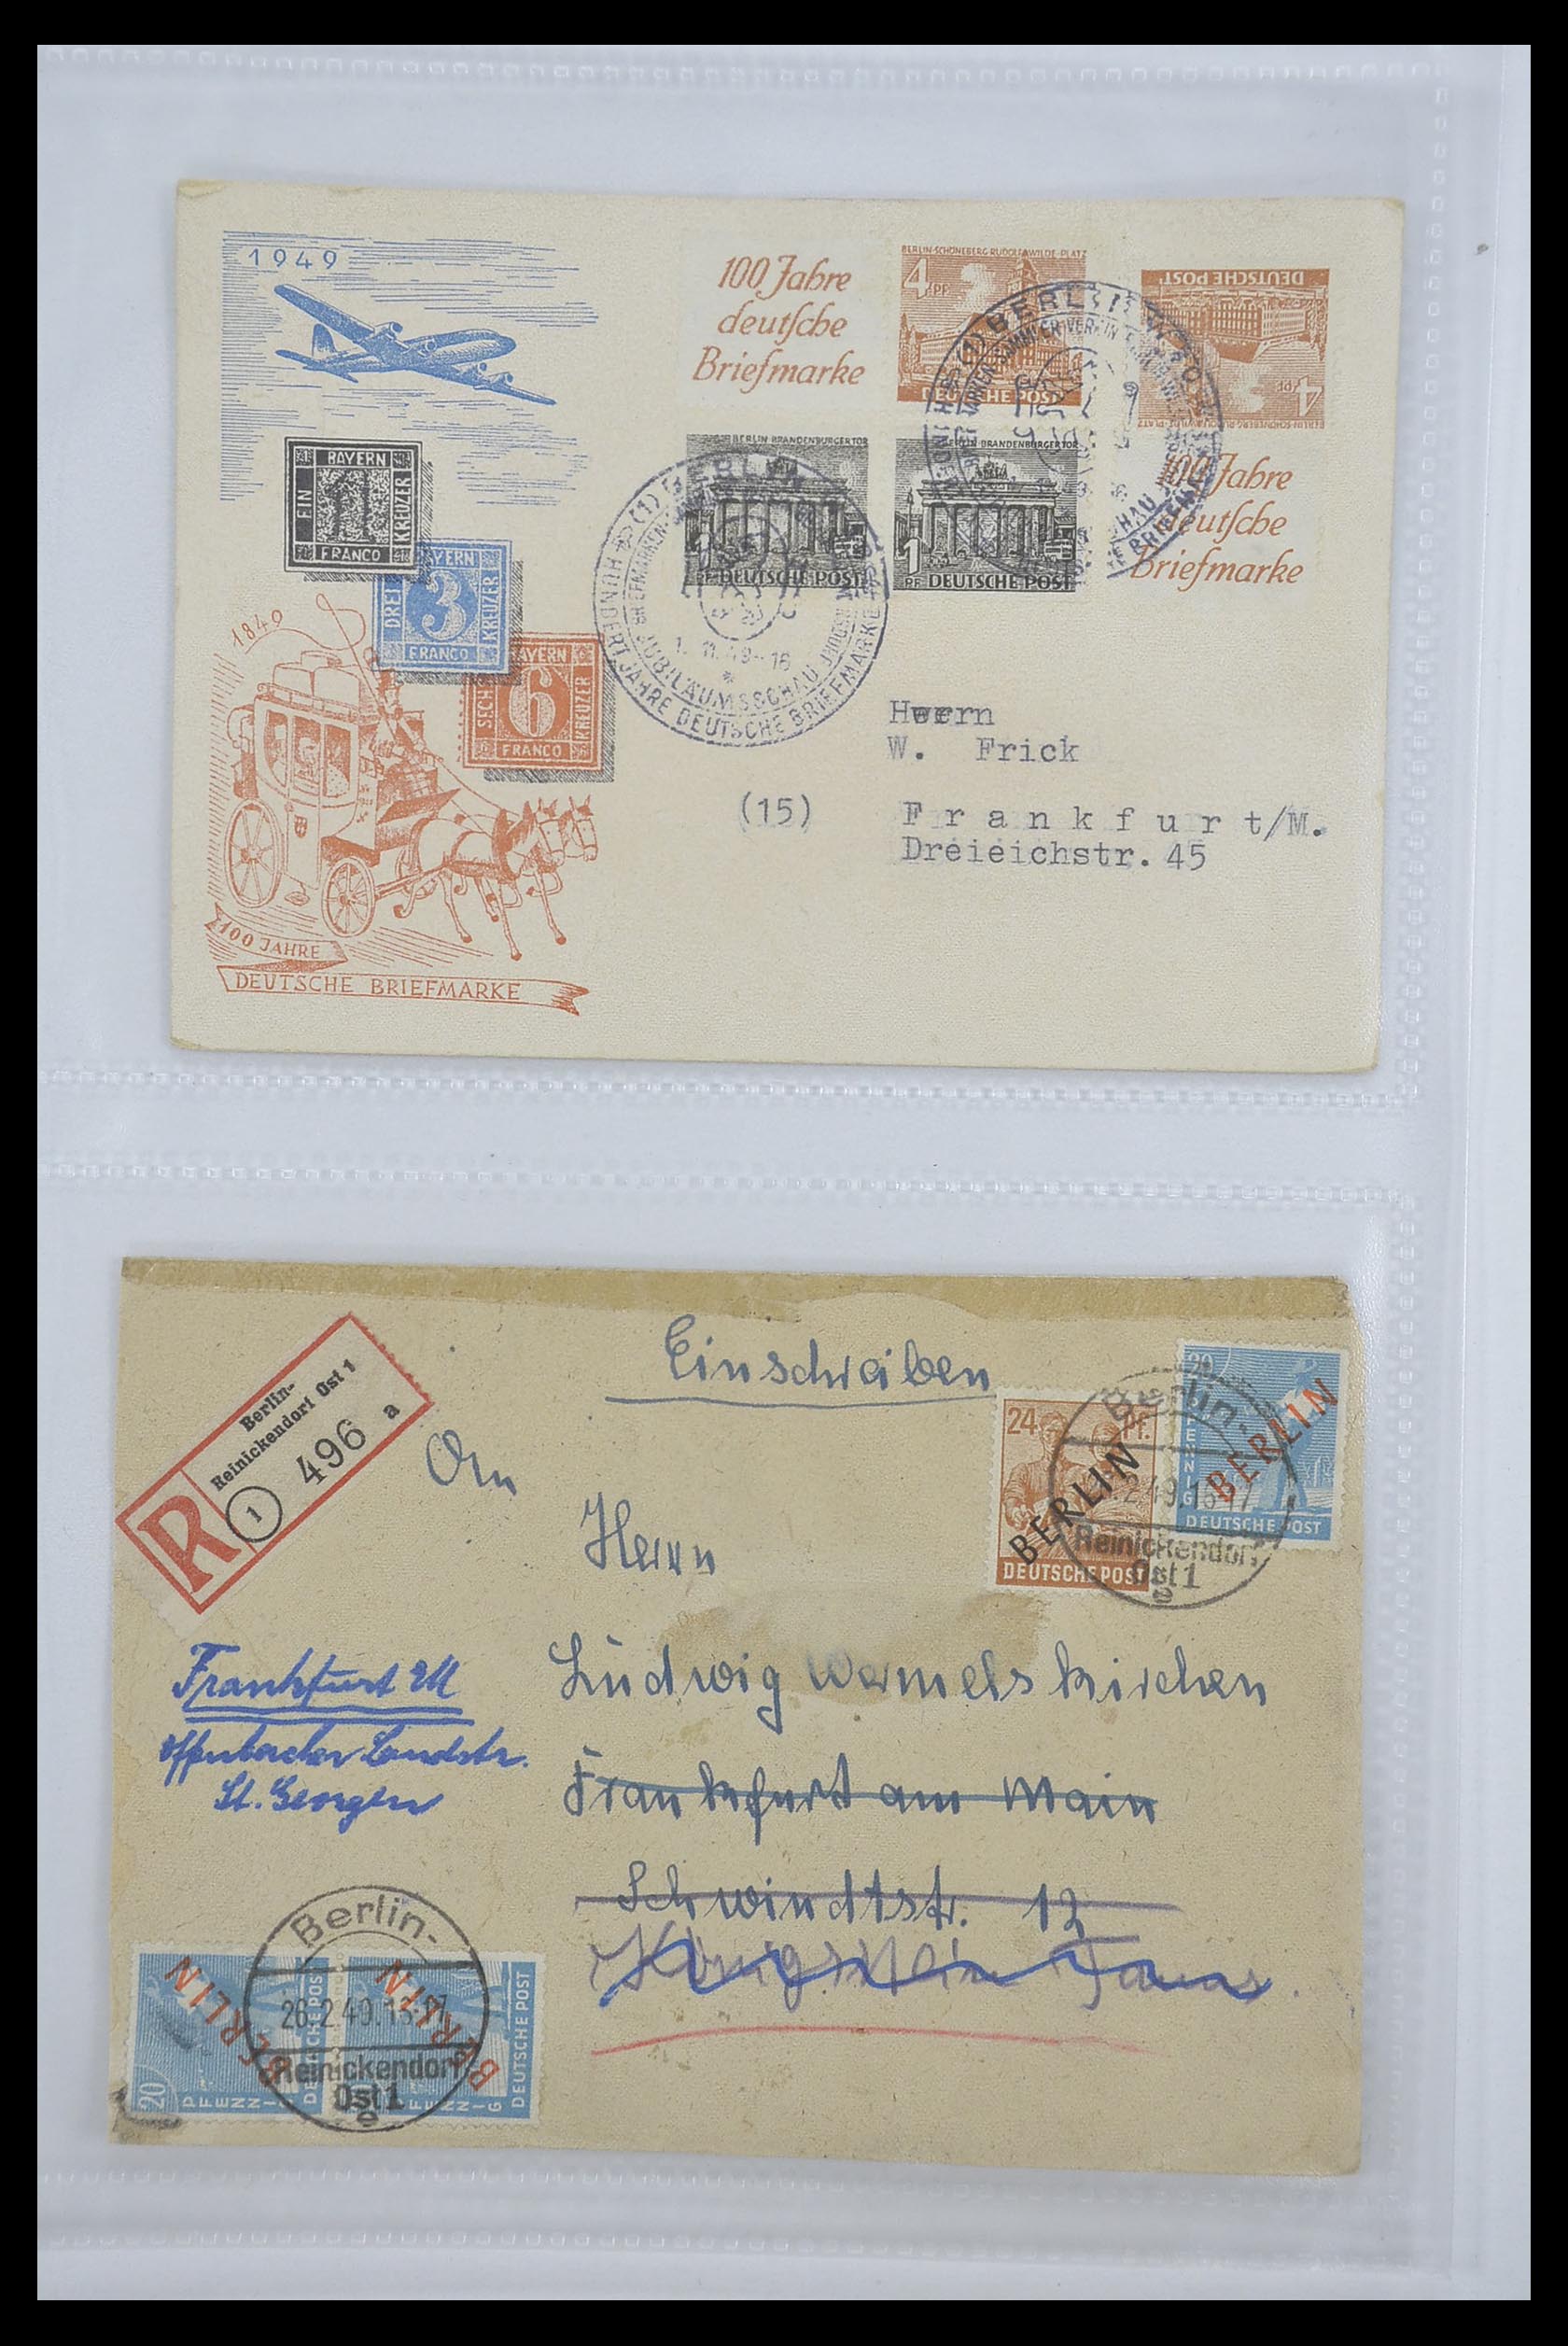 33290 007 - Stamp collection 33290 Berlin covers 1948-1957.